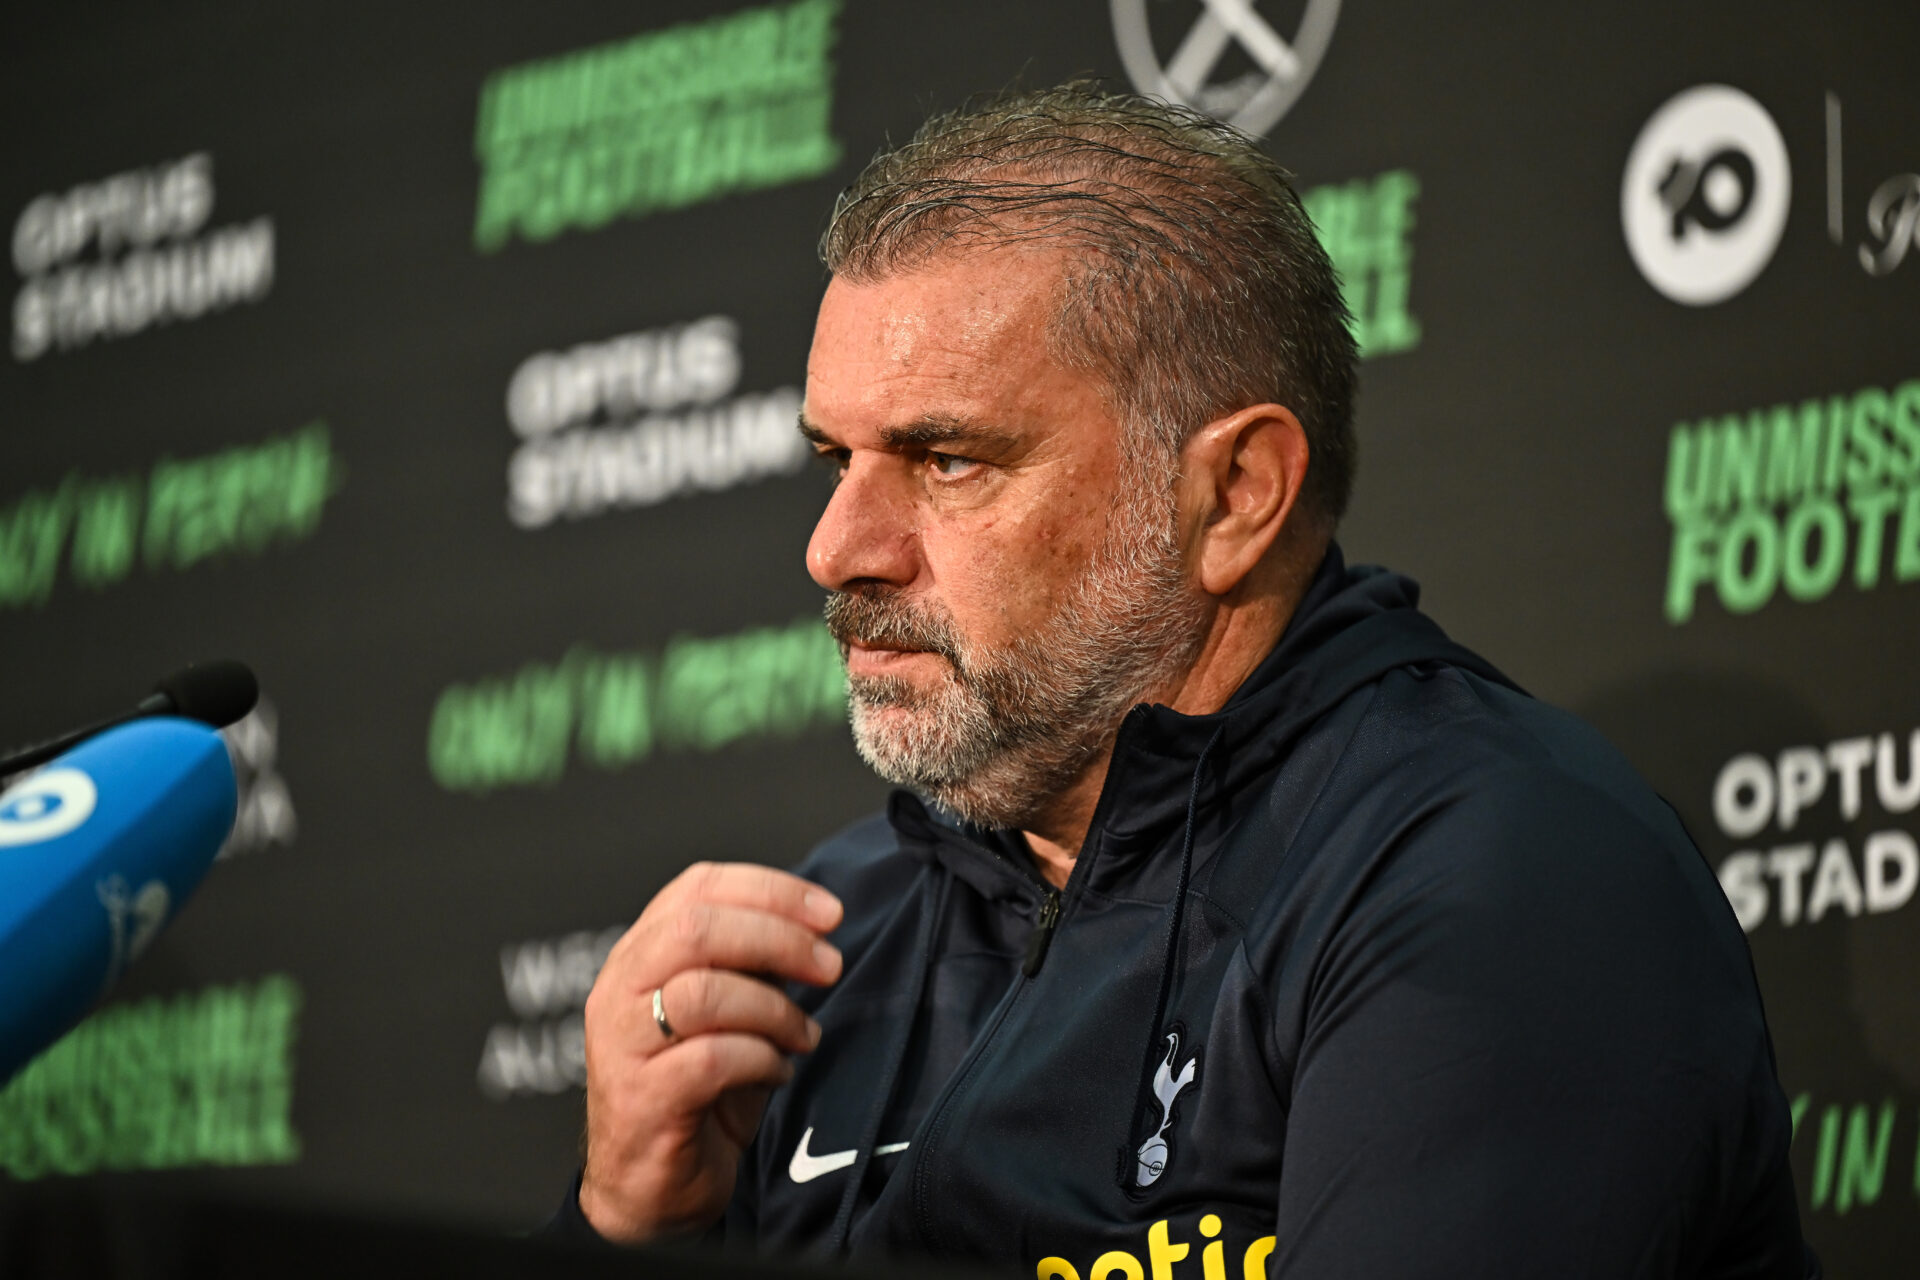 Ange Postecoglou after 3-2 defeat in friendly to West Ham